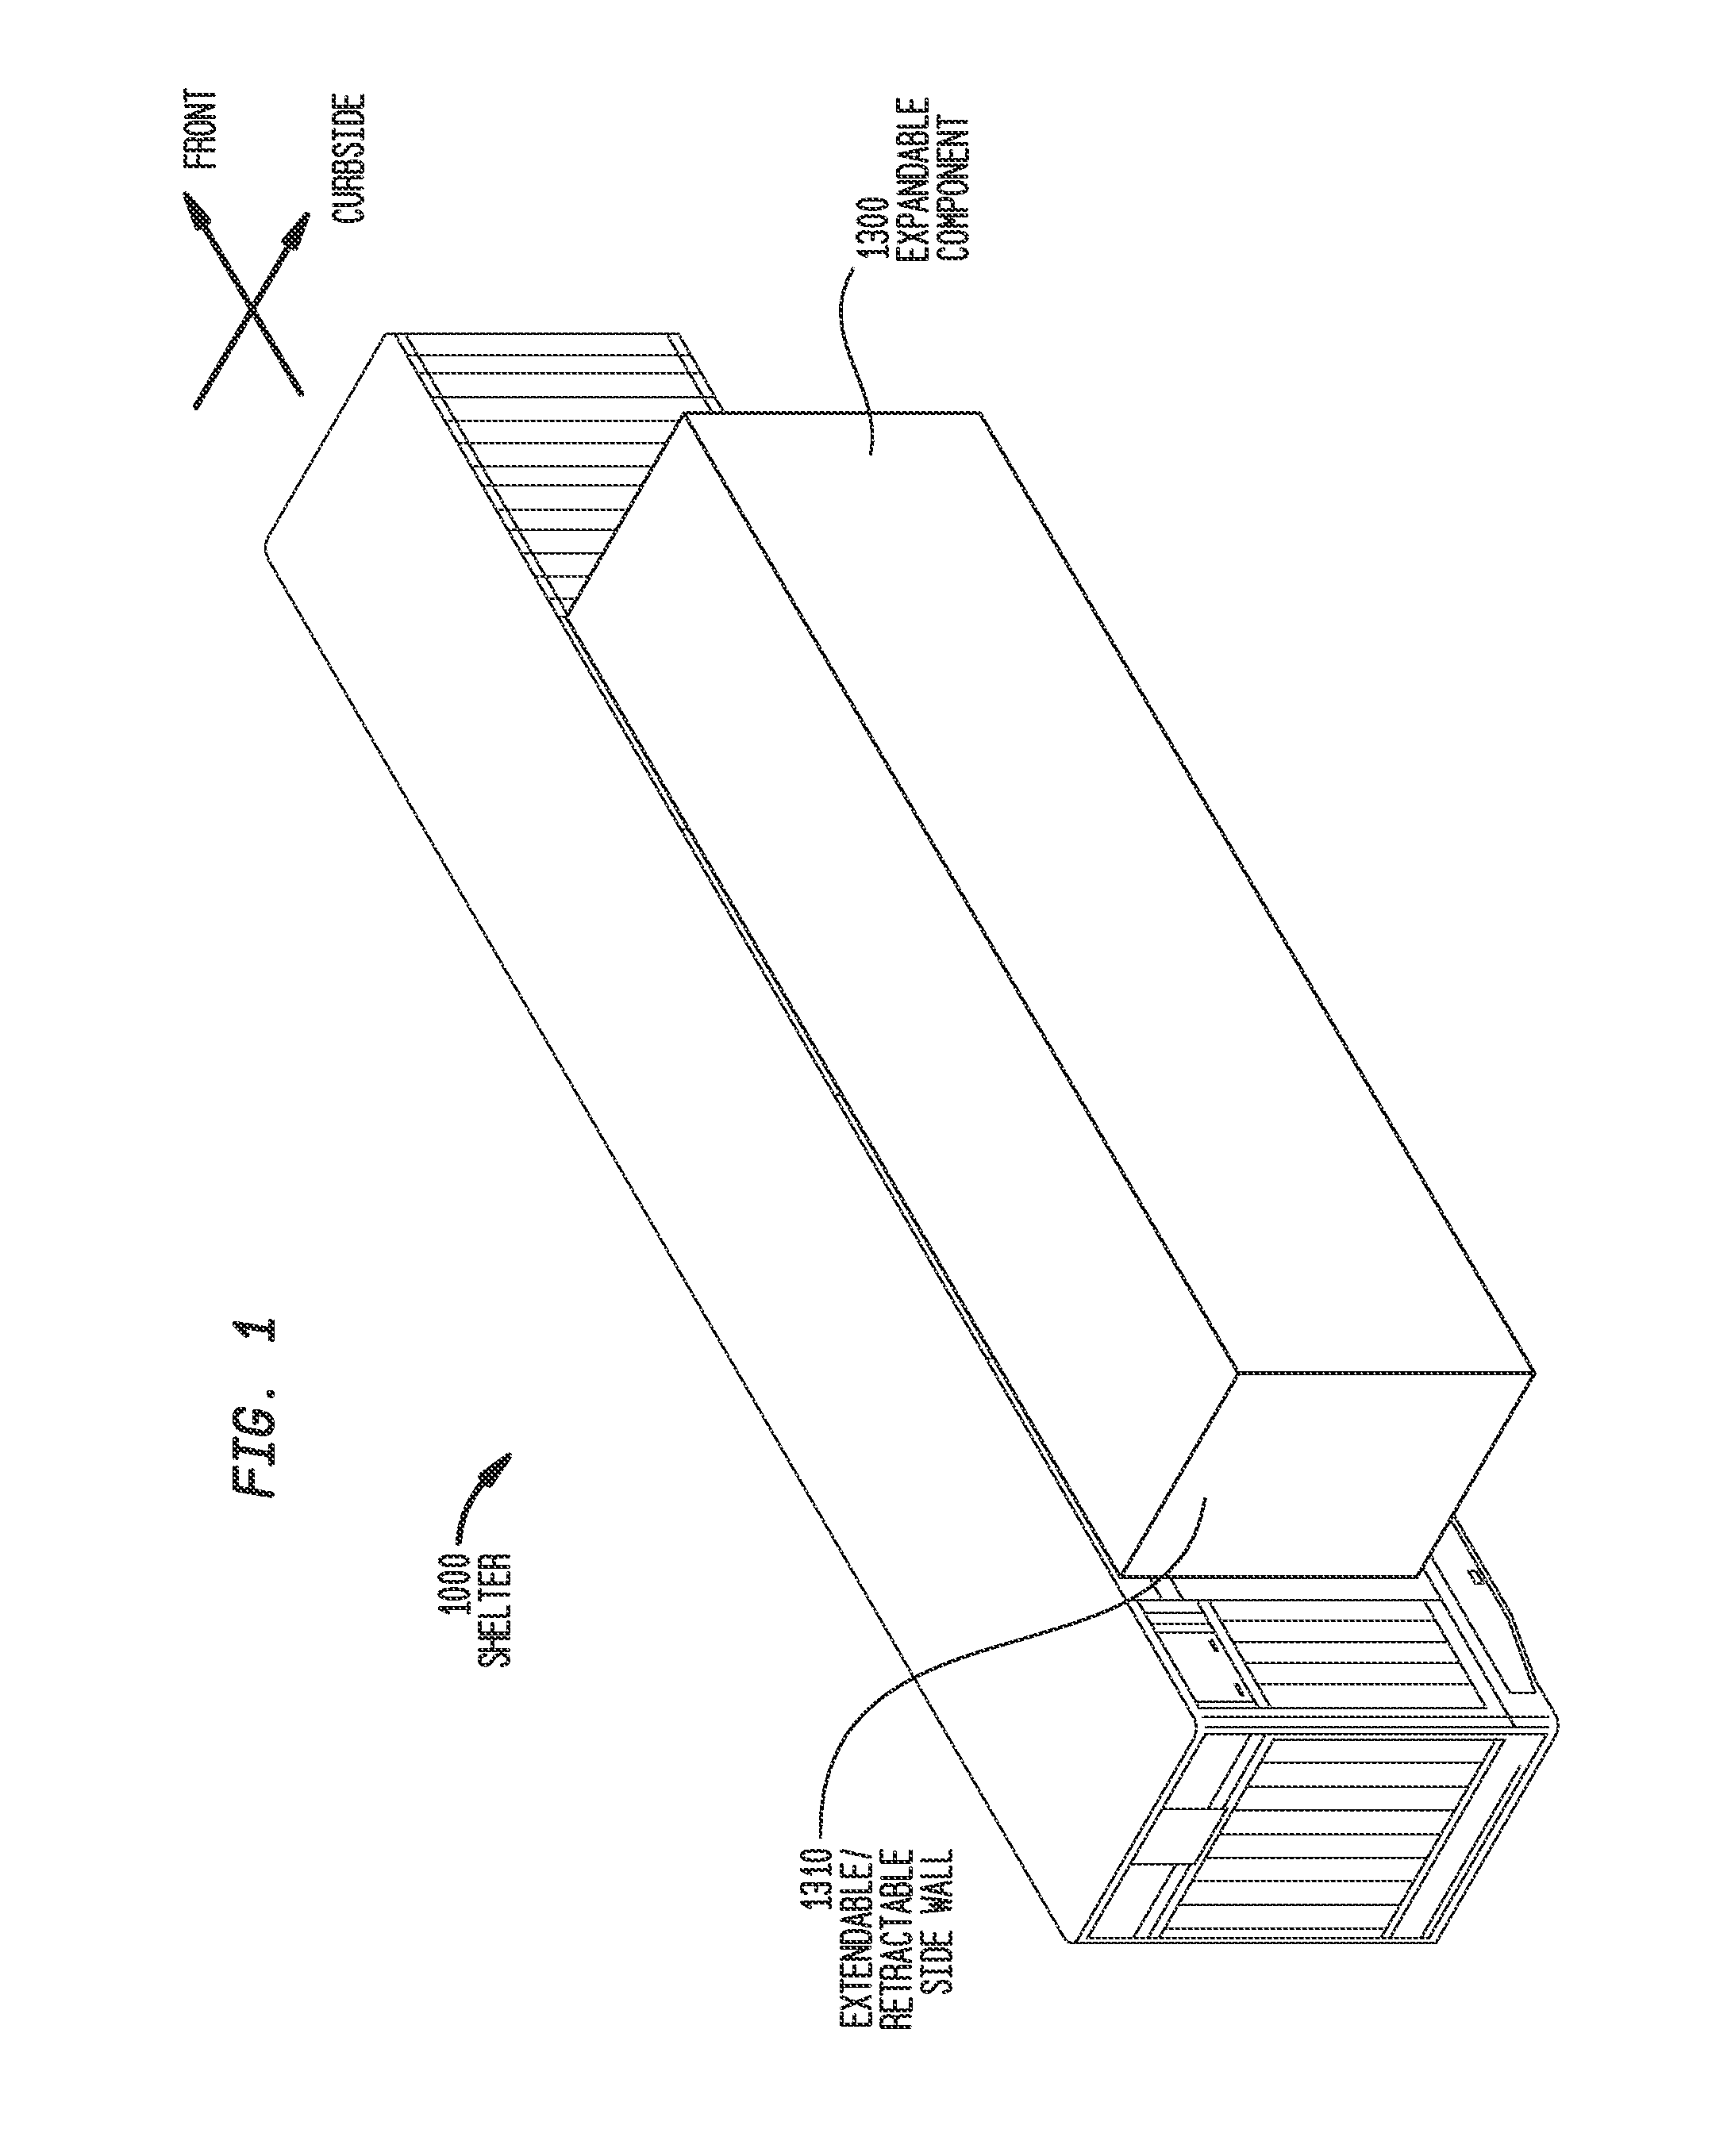 Shelter expandable component supports